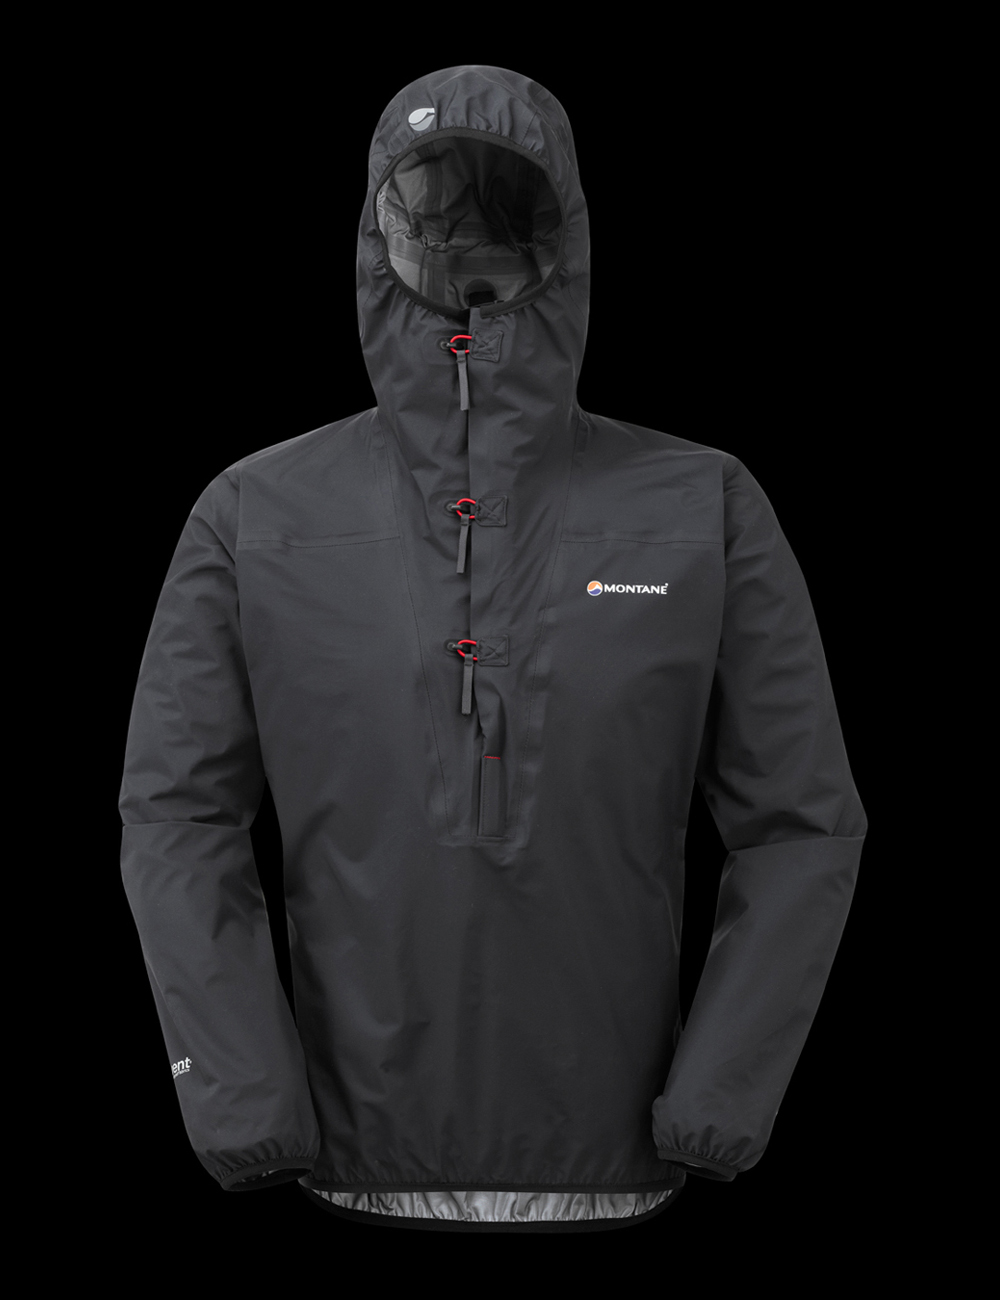 zoom_male_spektr_smock_black_front_Product_image_FOR_NEW_WEB.jpg